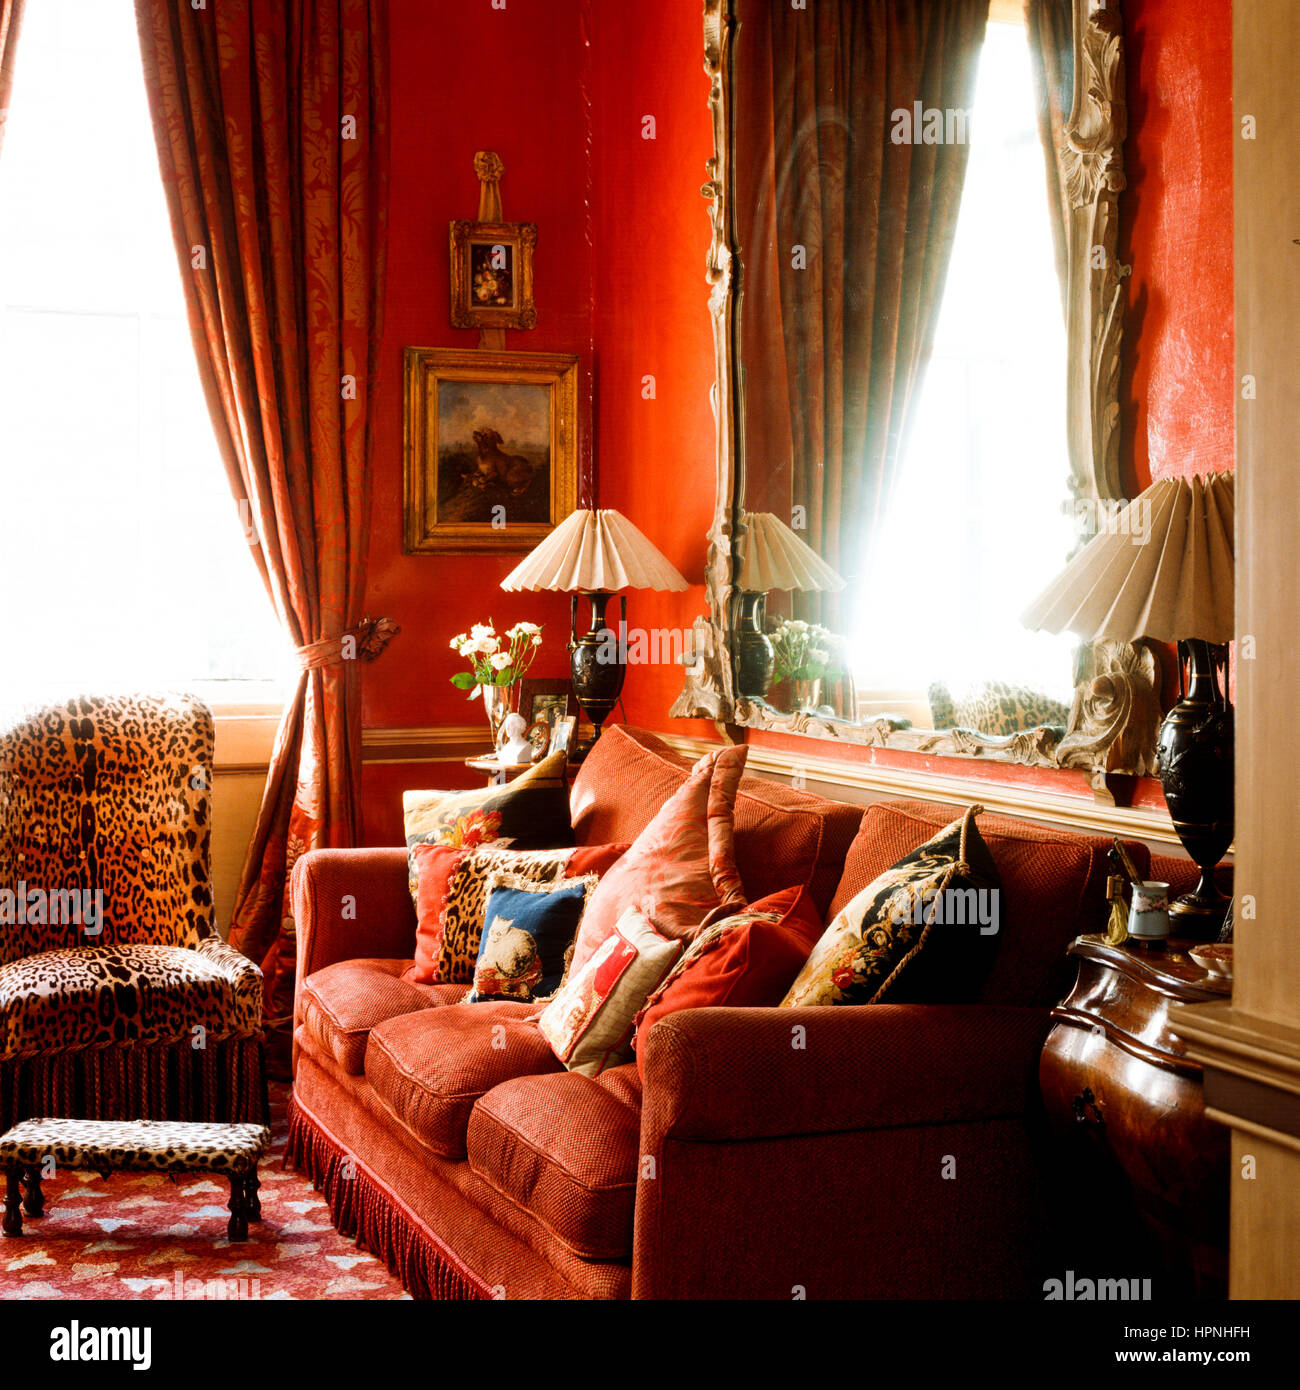 A vibrant red living room. Stock Photo